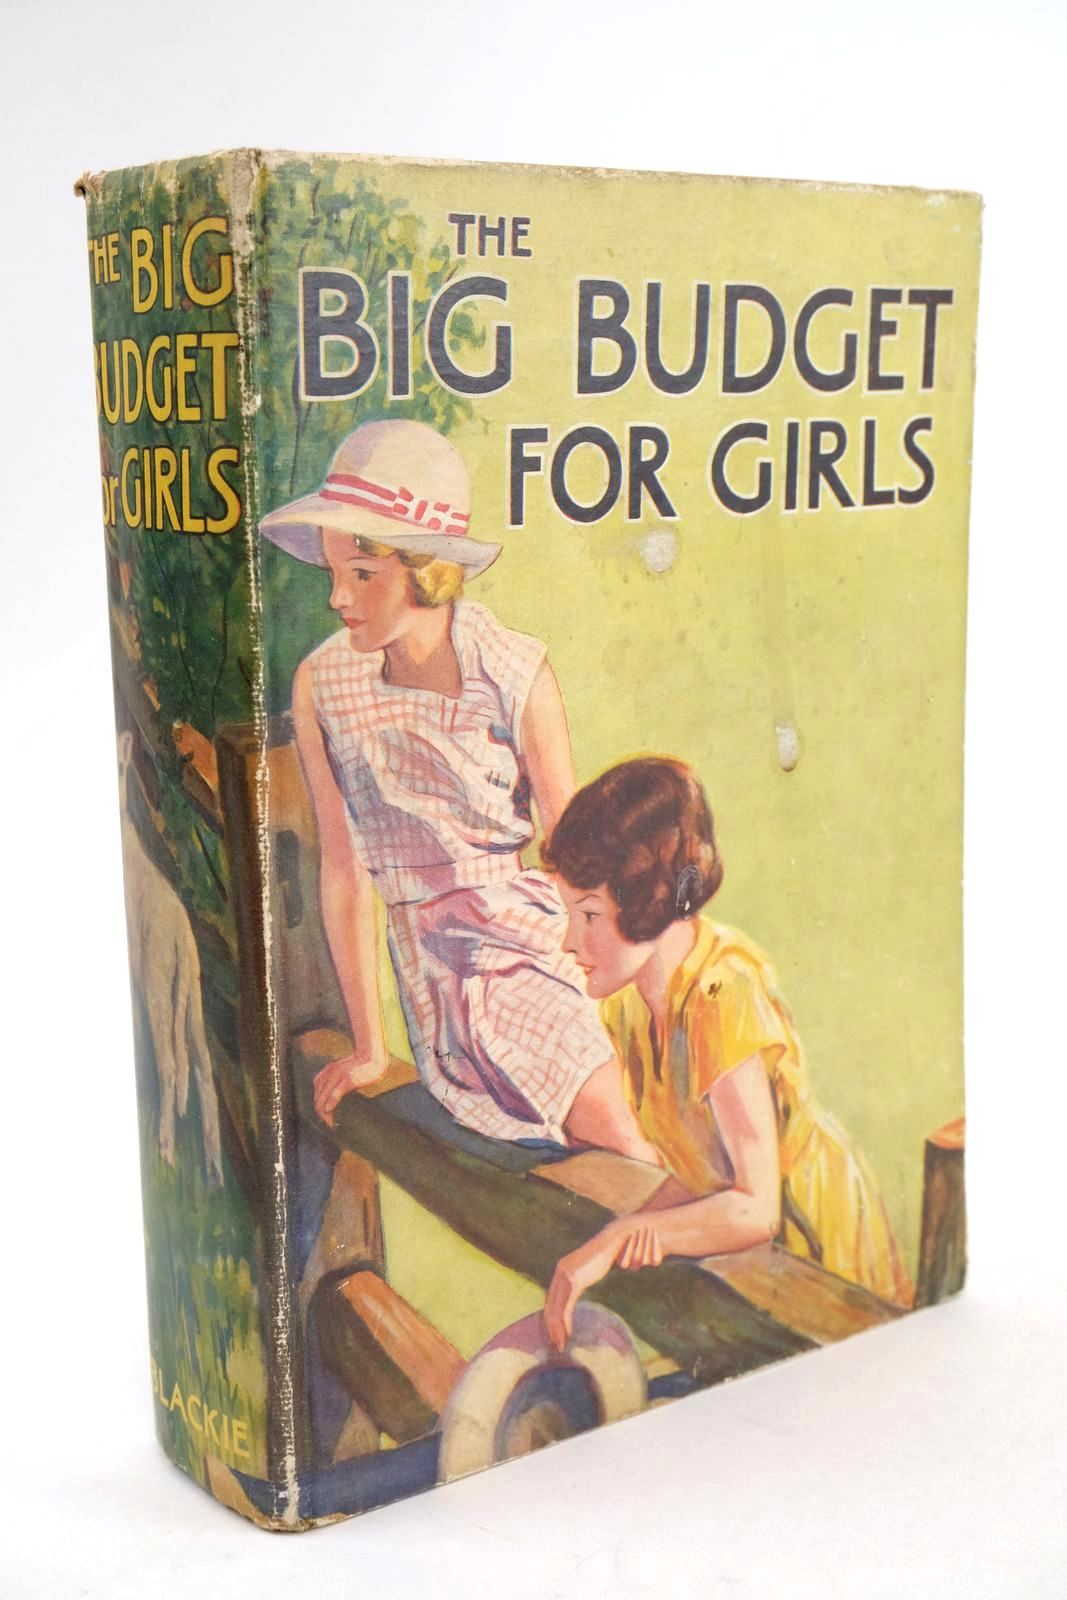 Photo of THE BIG BUDGET FOR GIRLS written by Merriman, Henrietta Norris, Phyllis I. Rutley, C. Bernard Buckingham, M.E. Wynne, May et al, illustrated by Brock, C.E. Bestall, Alfred Fraser, Peter et al., published by Blackie &amp; Son Ltd. (STOCK CODE: 1325125)  for sale by Stella & Rose's Books